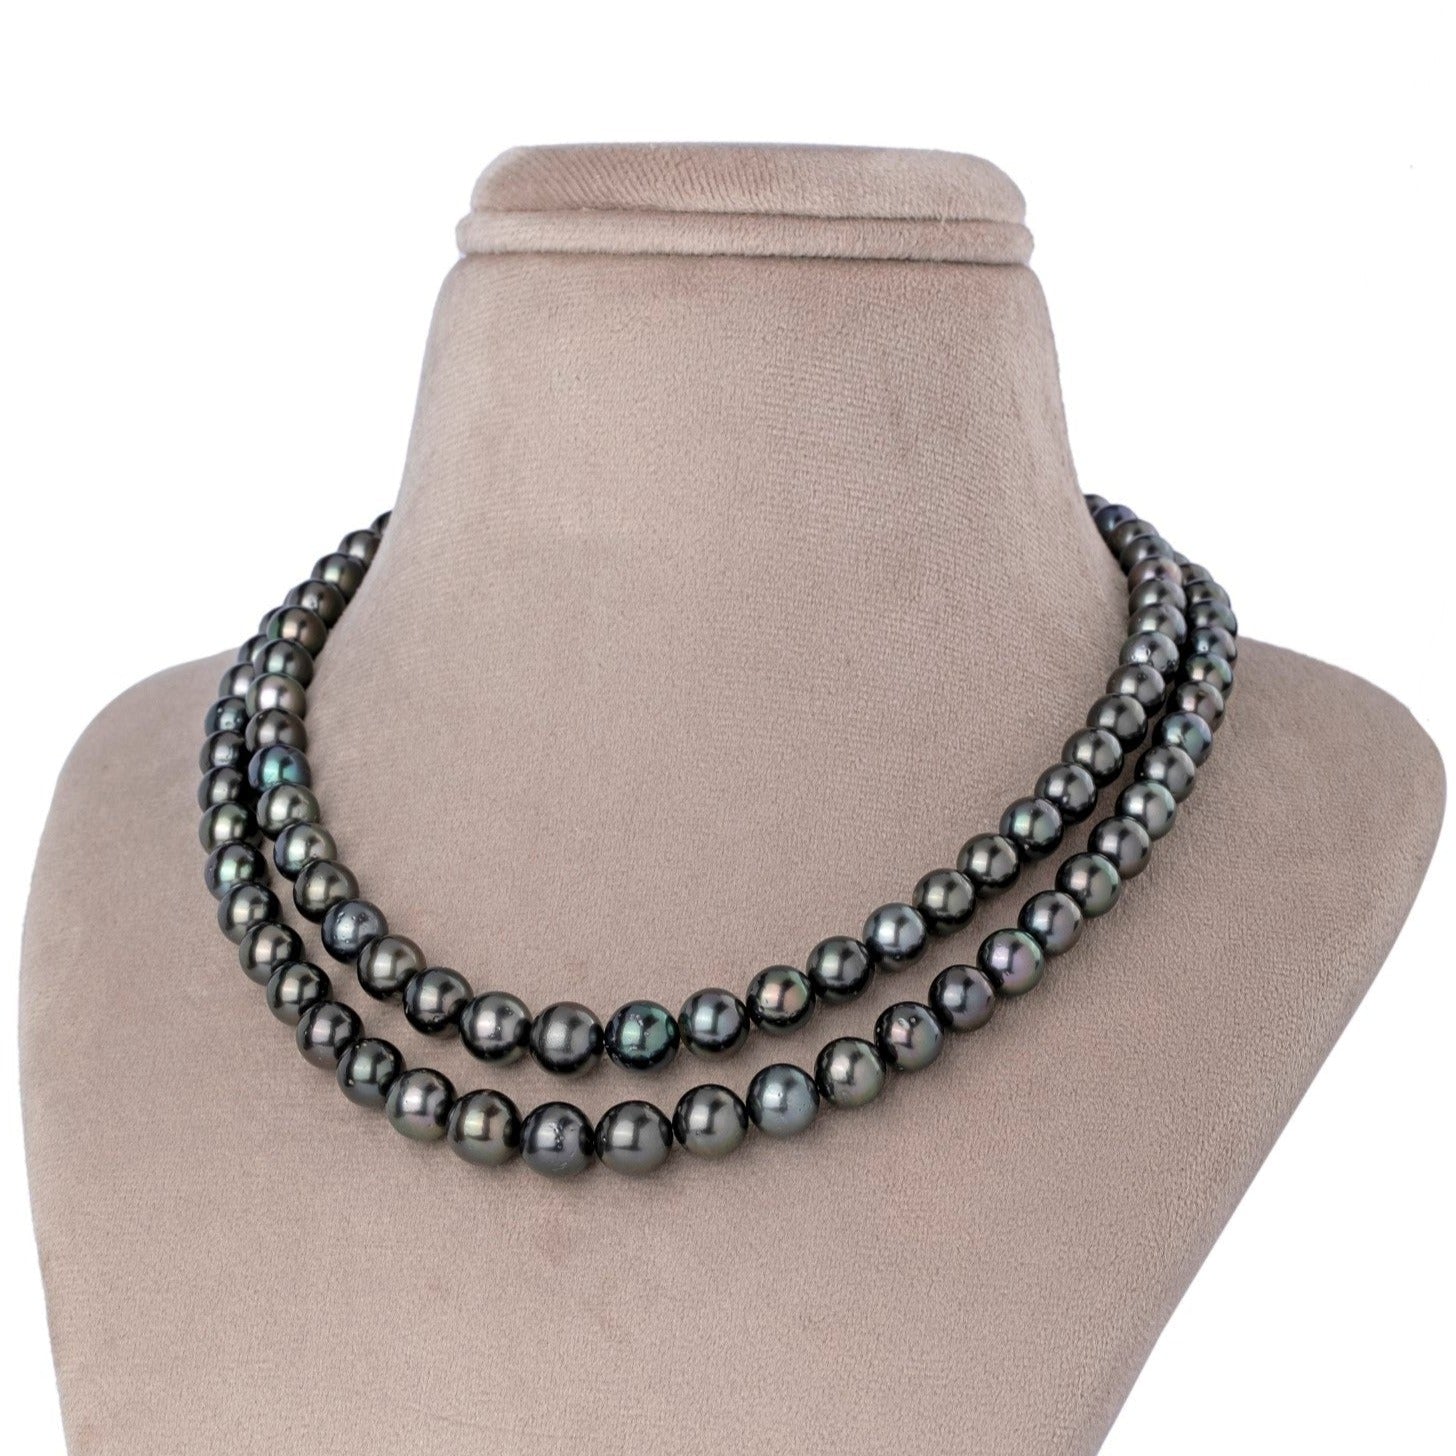 Oceanic Tahitian Pearl Necklace with Greenish-Blue Hints